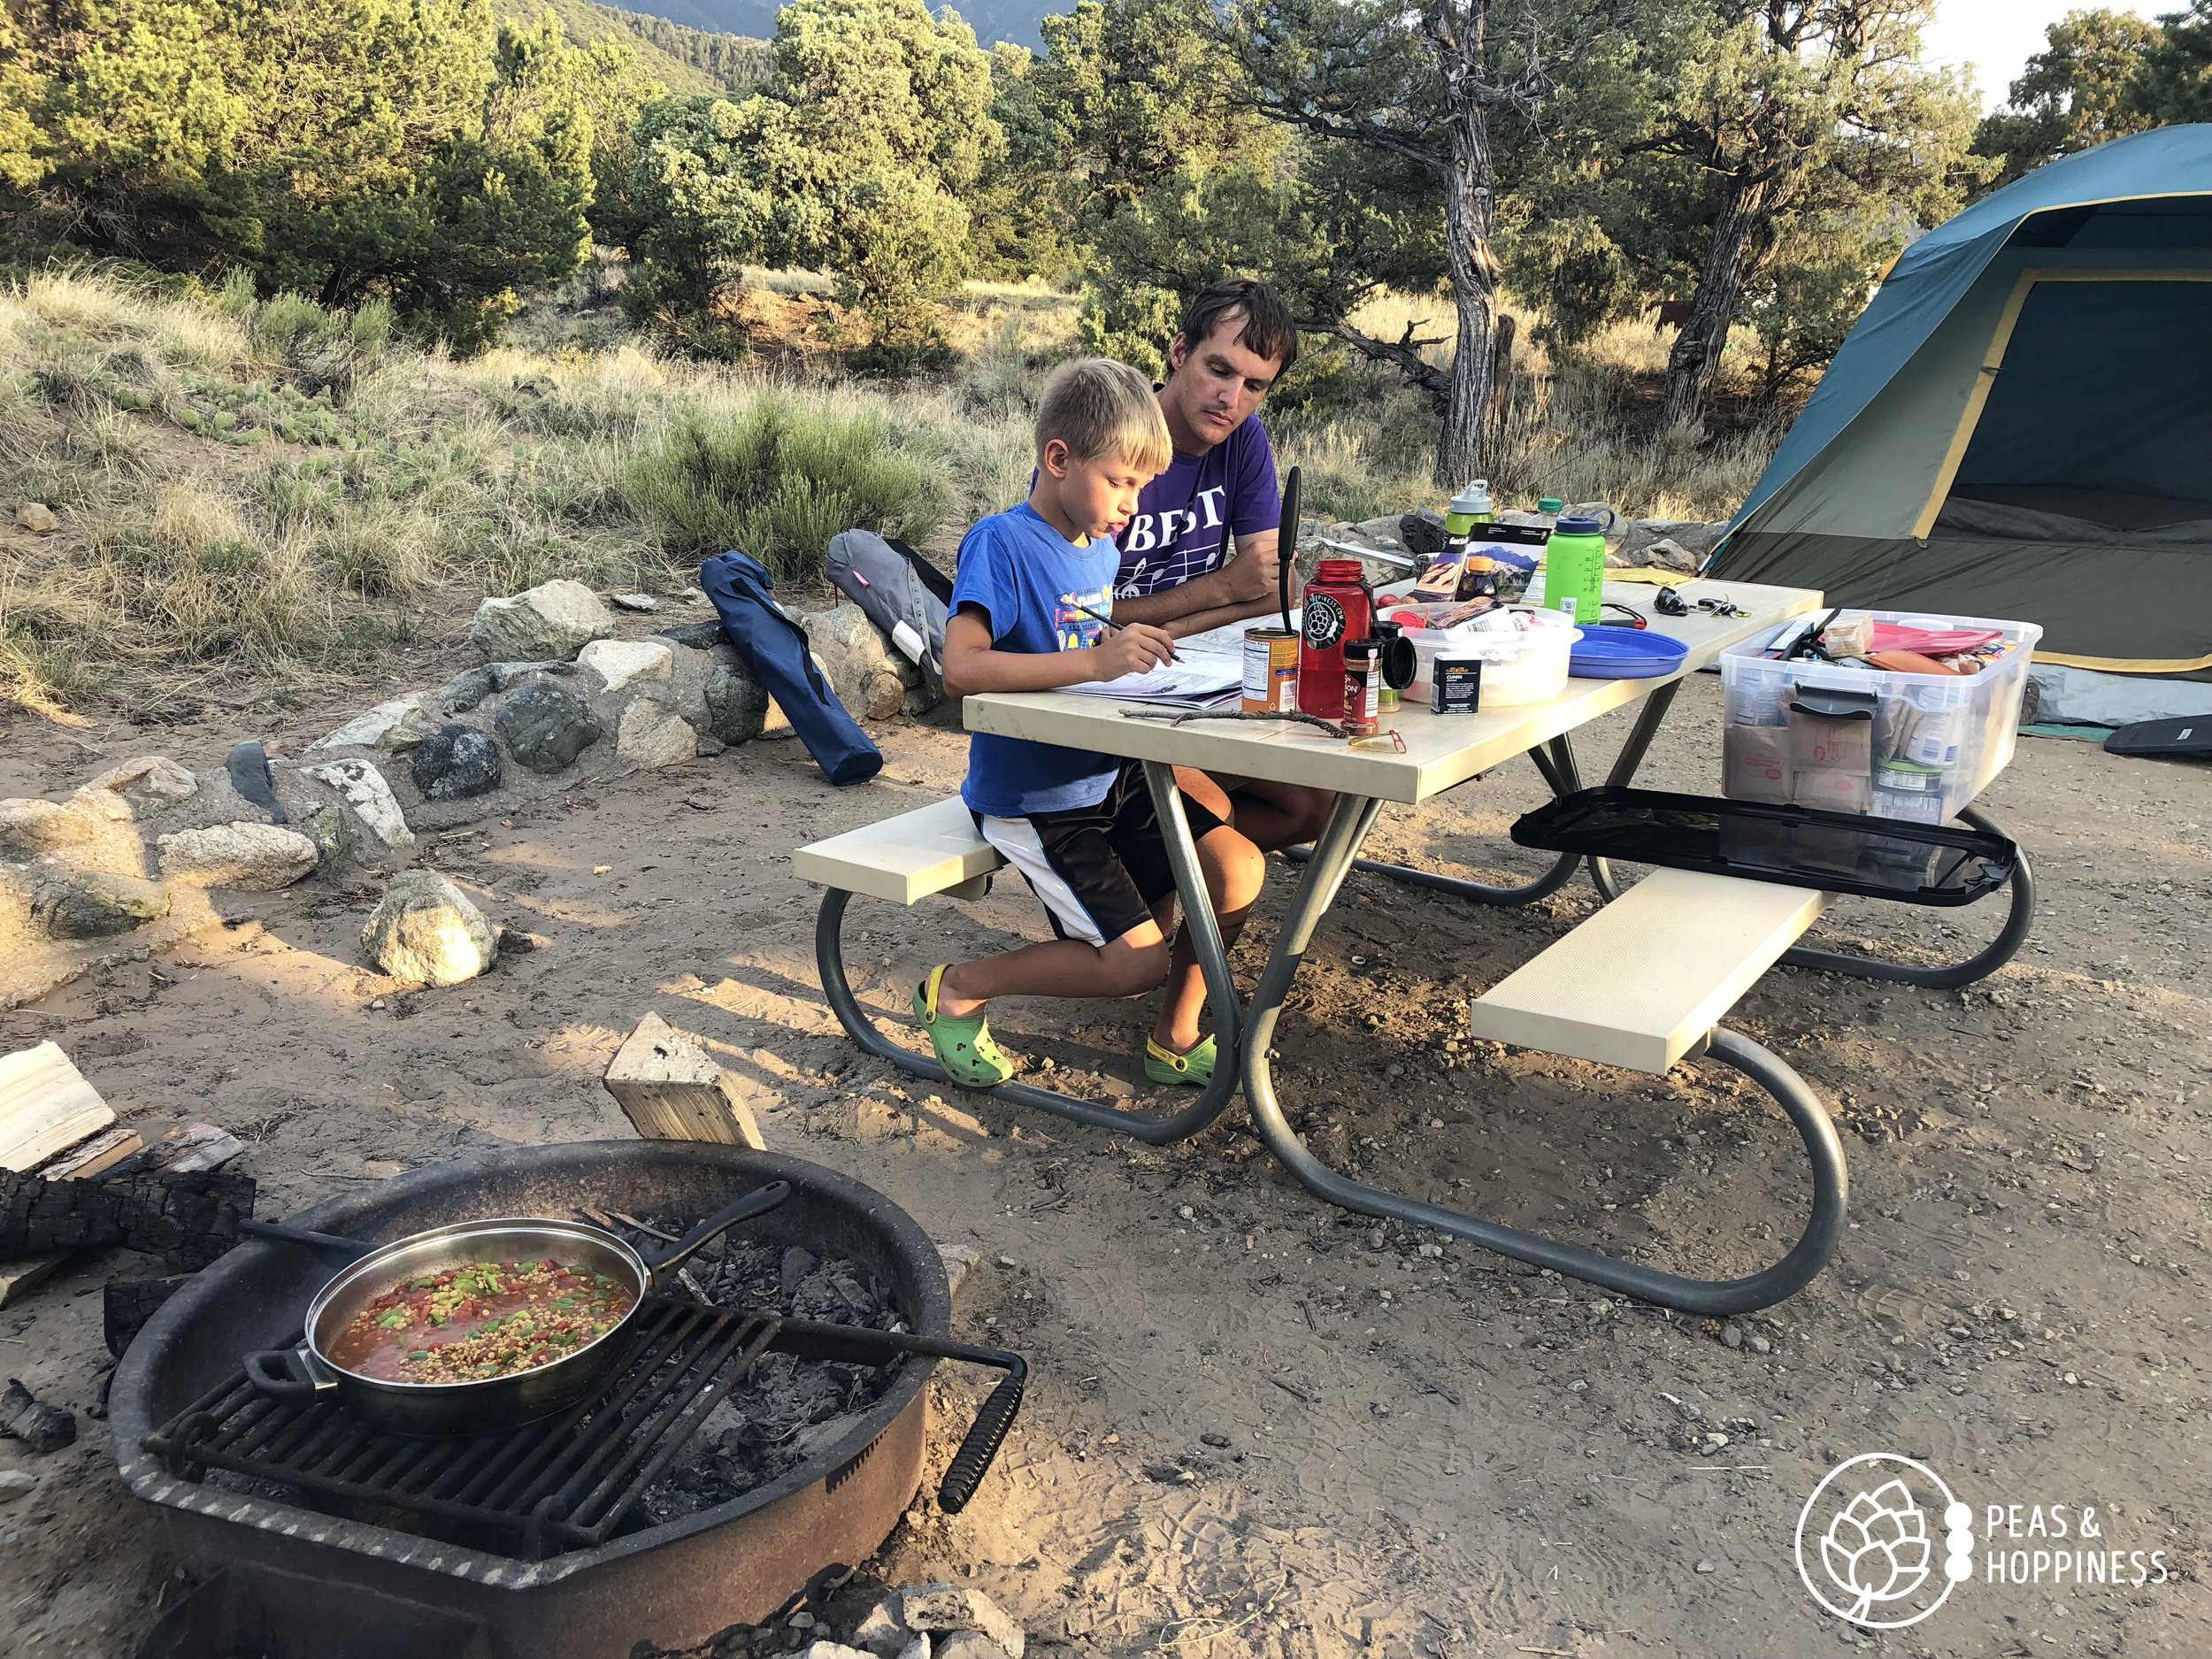 Working on Jonah's Junior Ranger book while Lentil Frito Pie cooks over the fire. Great Sand Dunes National Park.